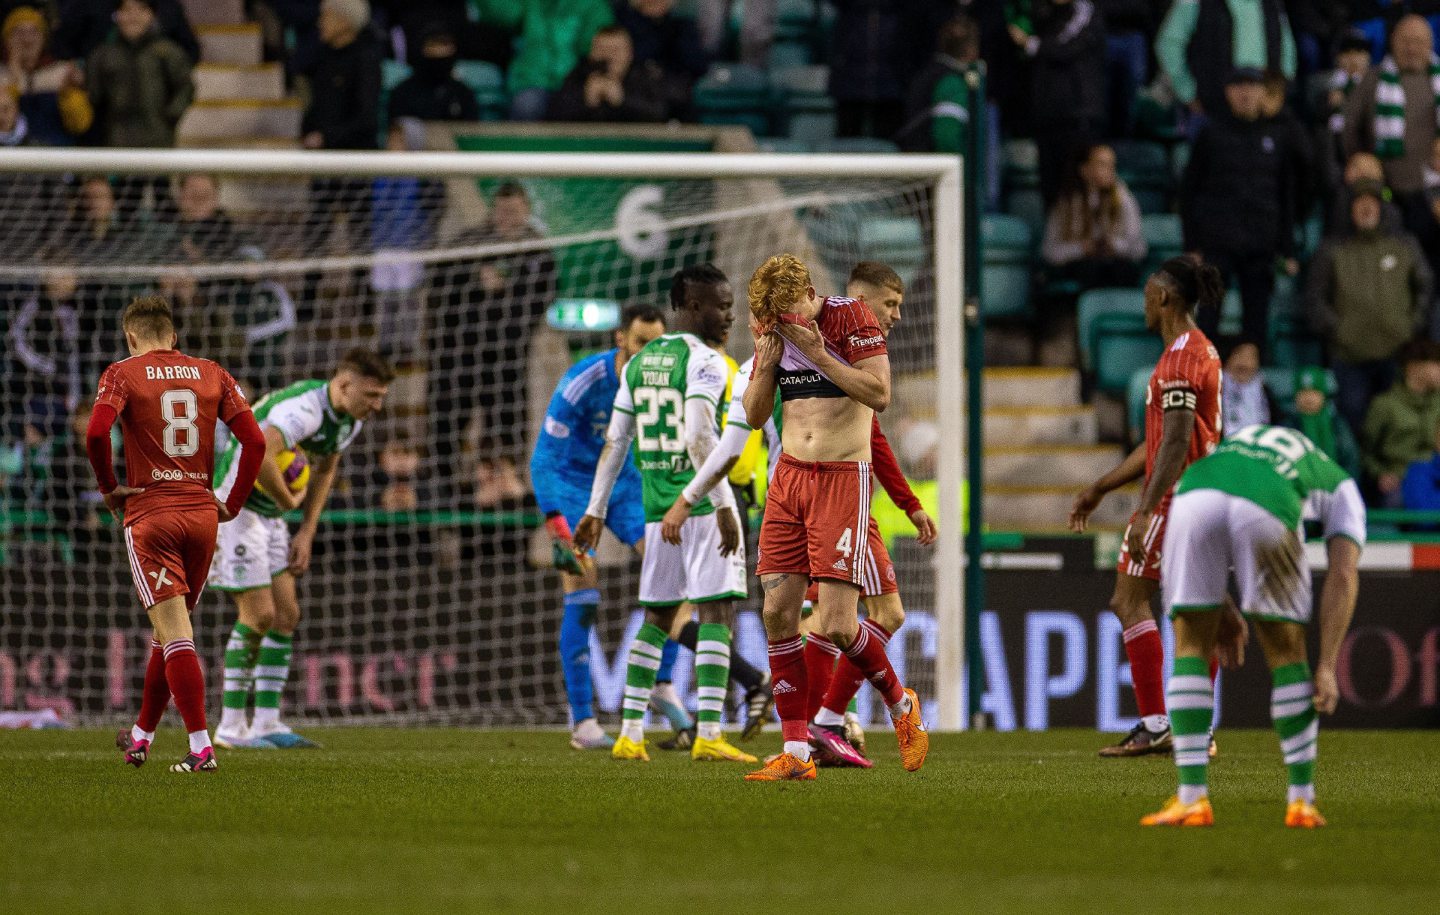 Liam Scales trudges off after being sent off for Aberdeen against Hibernian. Image: Vagelis Georgariou/Action Plus/Shutterstock (13744075bh)